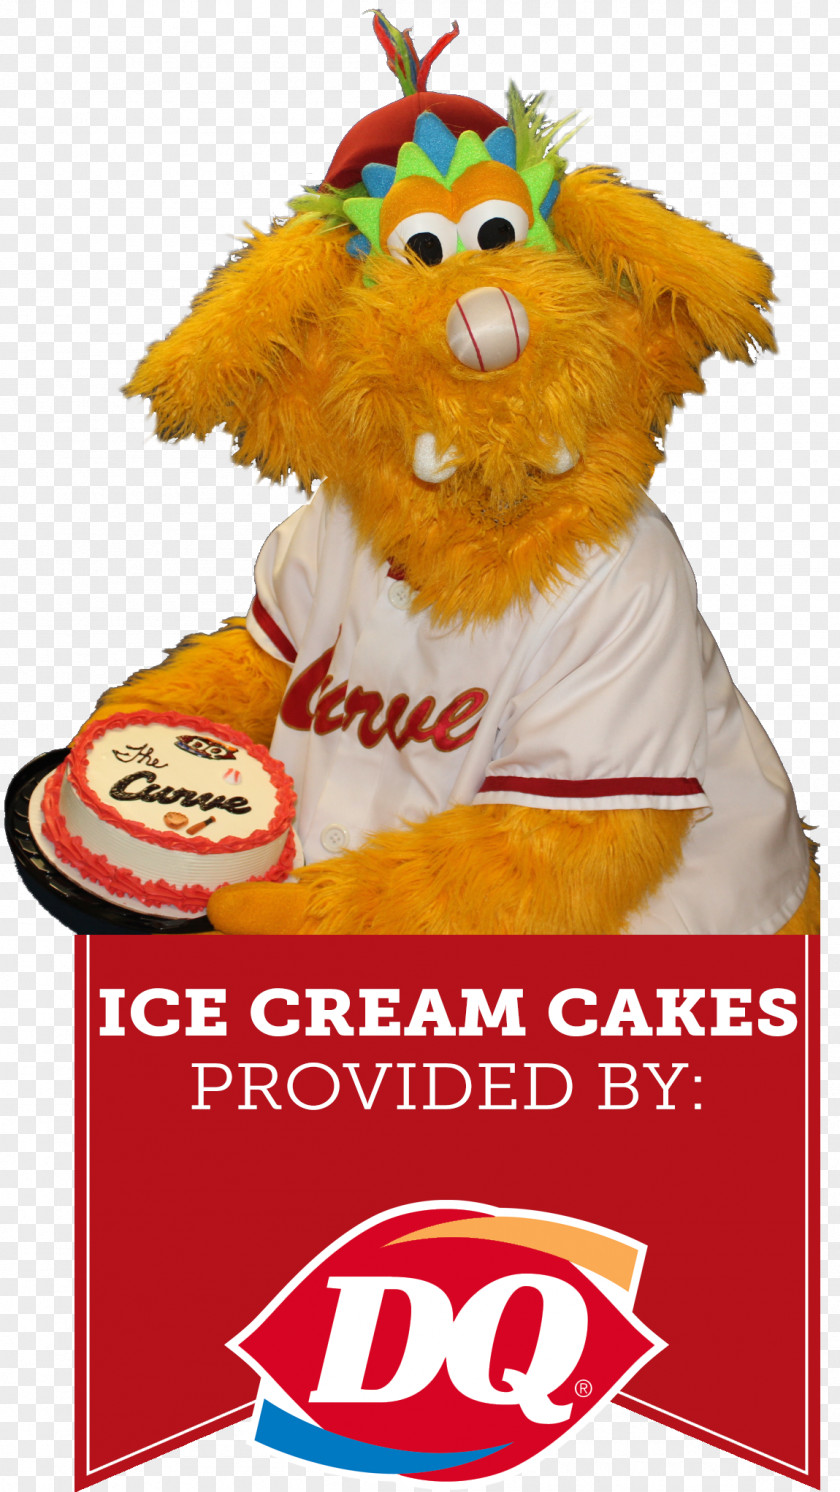 Ice Cream Party Breakfast Cereal Altoona Curve Birthday Cake PNG